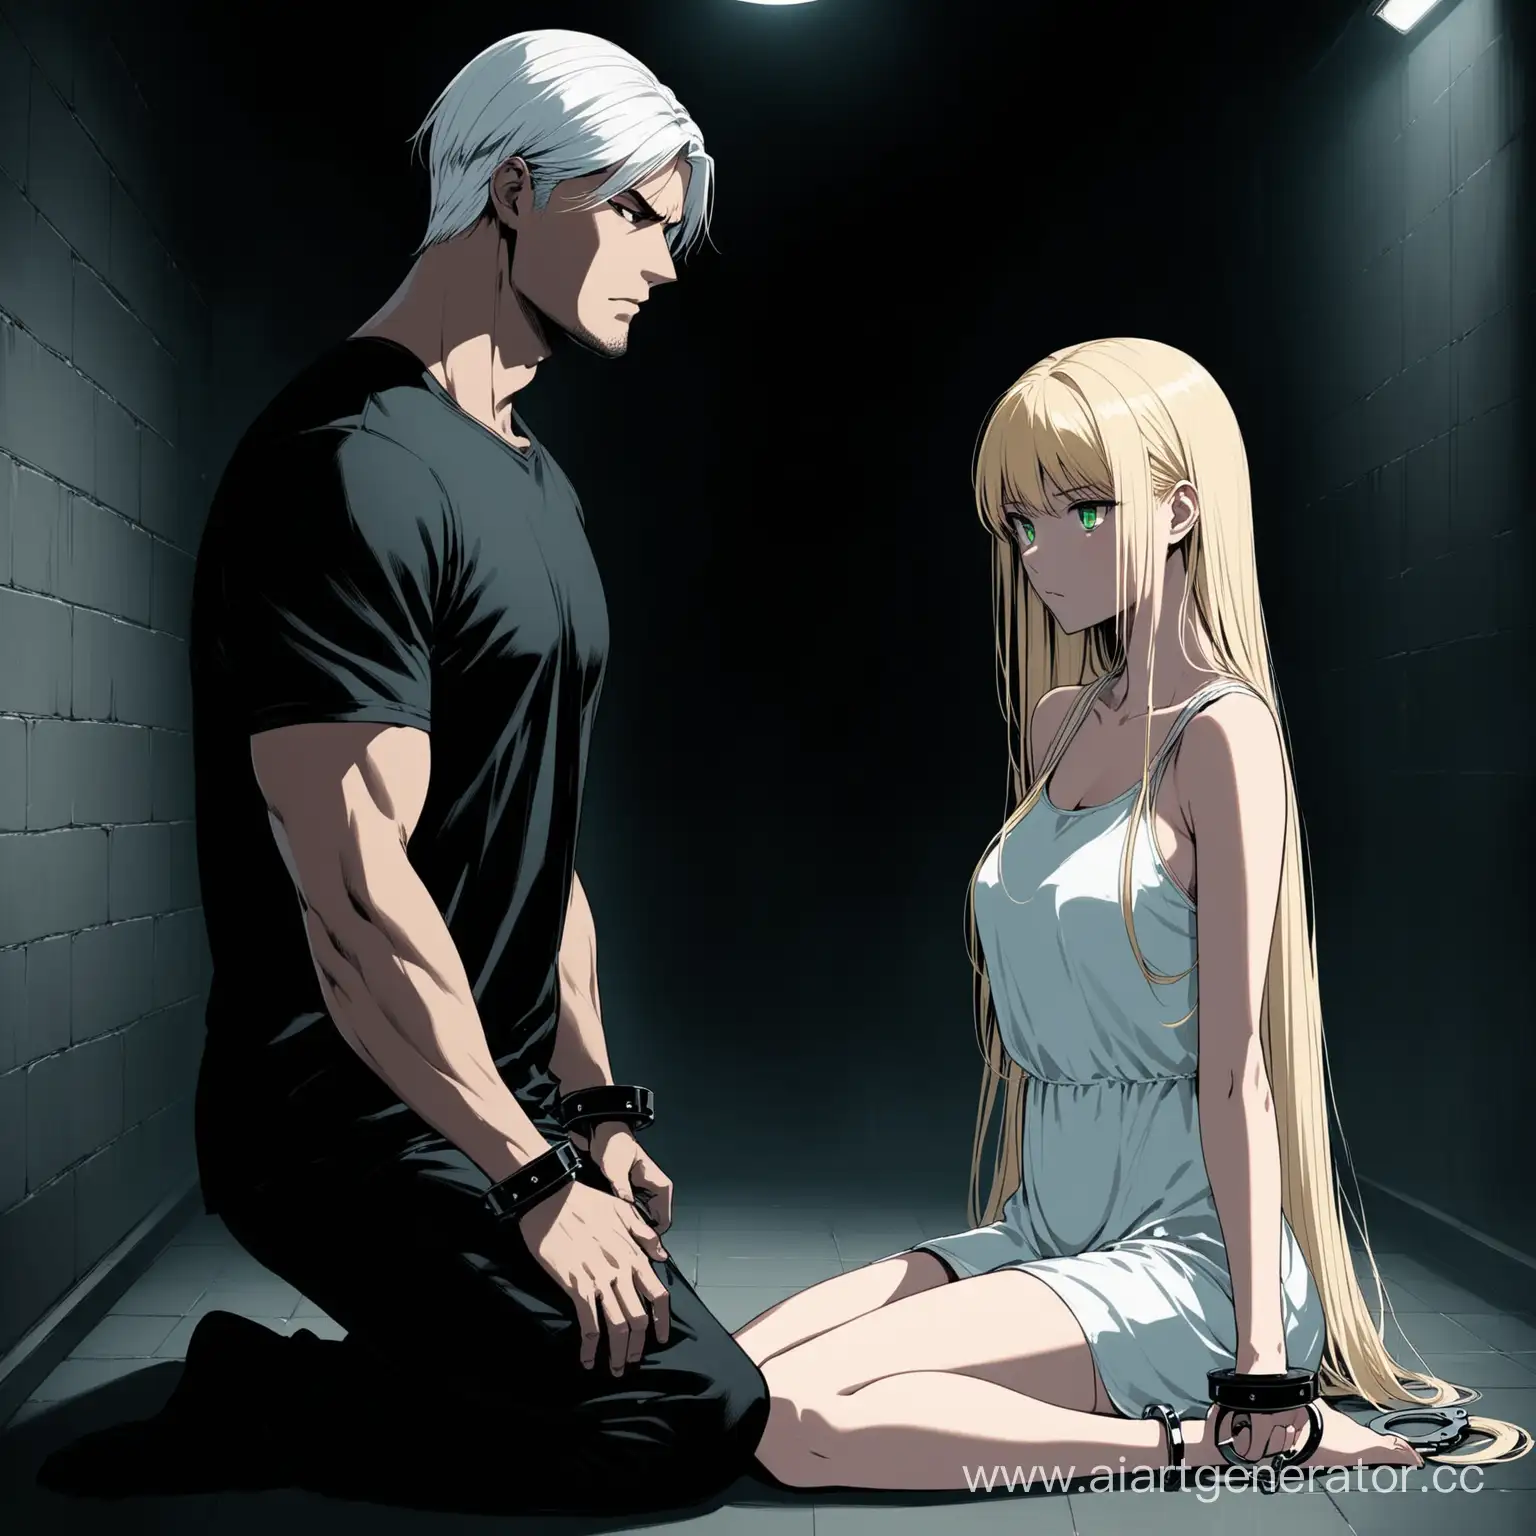 Captivity-Blonde-Girl-Handcuffed-by-Tall-and-Ominous-Figure-in-Basement